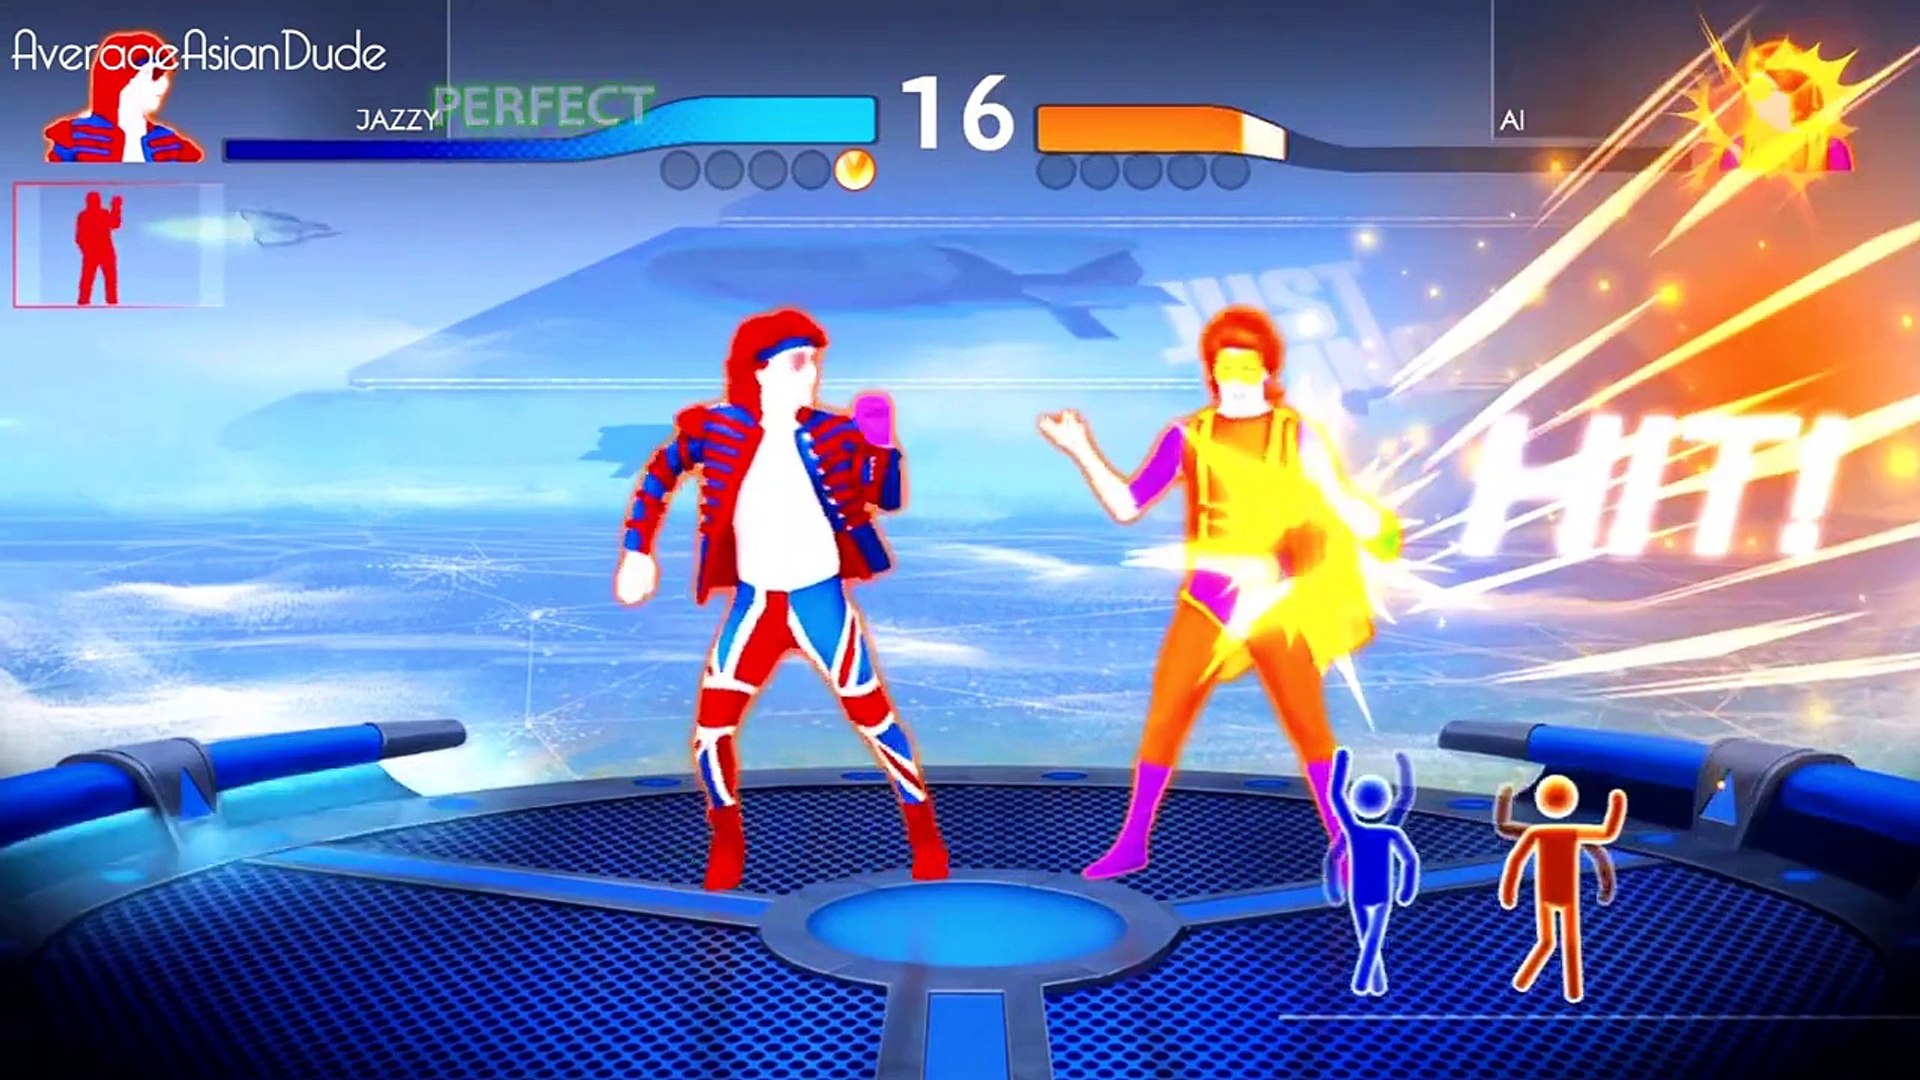 Just Dance 4 - Moves Like Jagger VS. Never Gonna Give You Up - Battle Mode  - 5* Stars - video Dailymotion